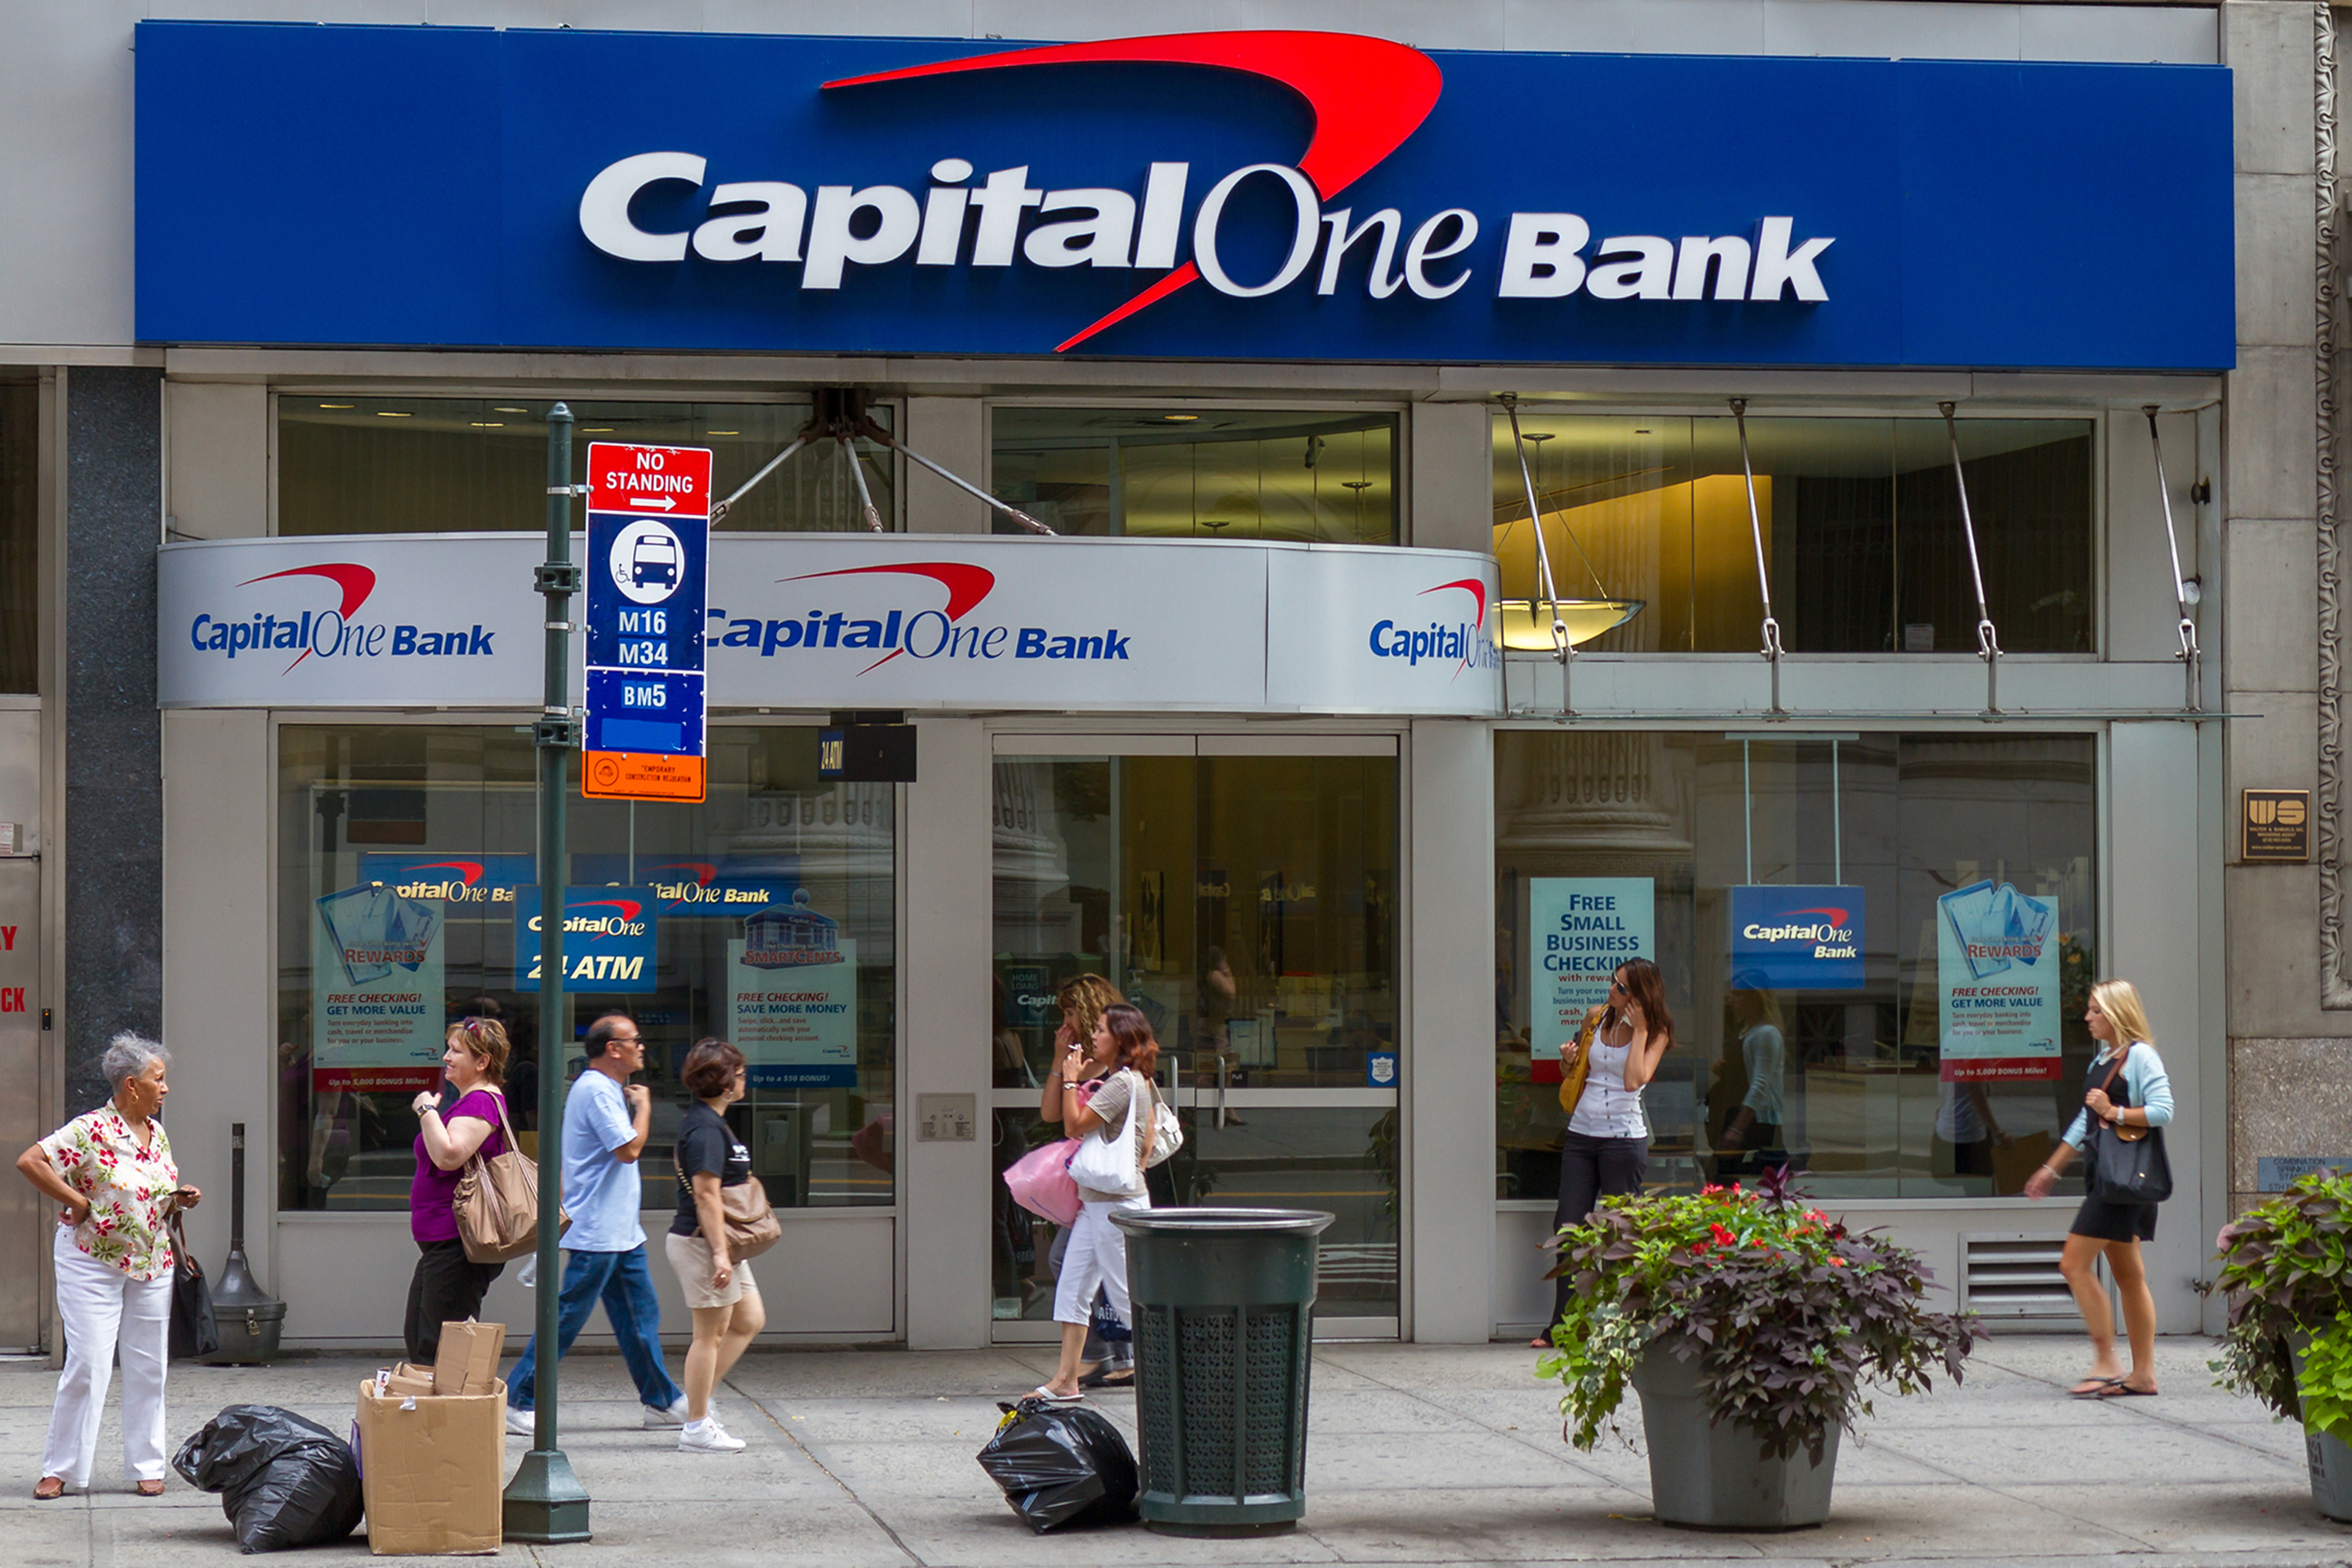 A Capital One Breach Has Affected Over 100 Million People — Here’s How to Tell If You Were Hit and What to Do